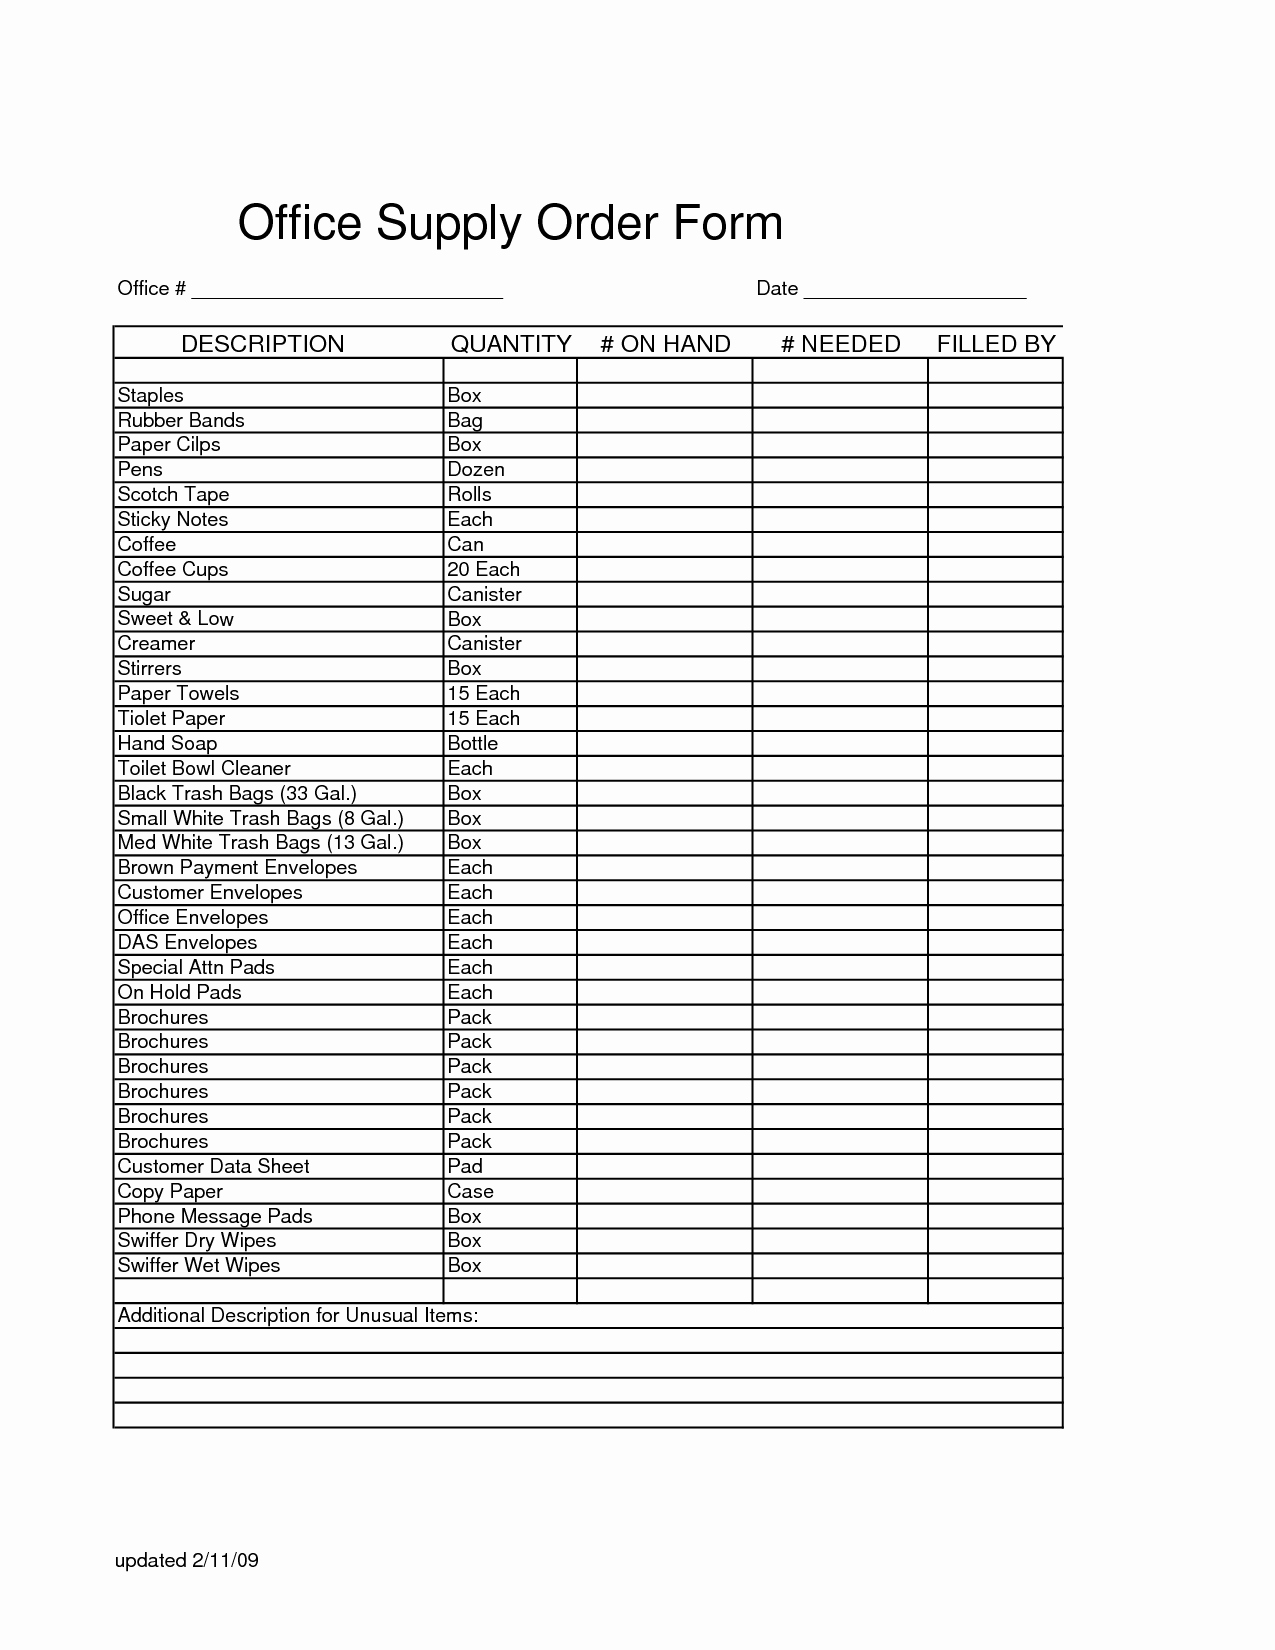 Office Supply order form Template Fresh Fice Supply order form Template